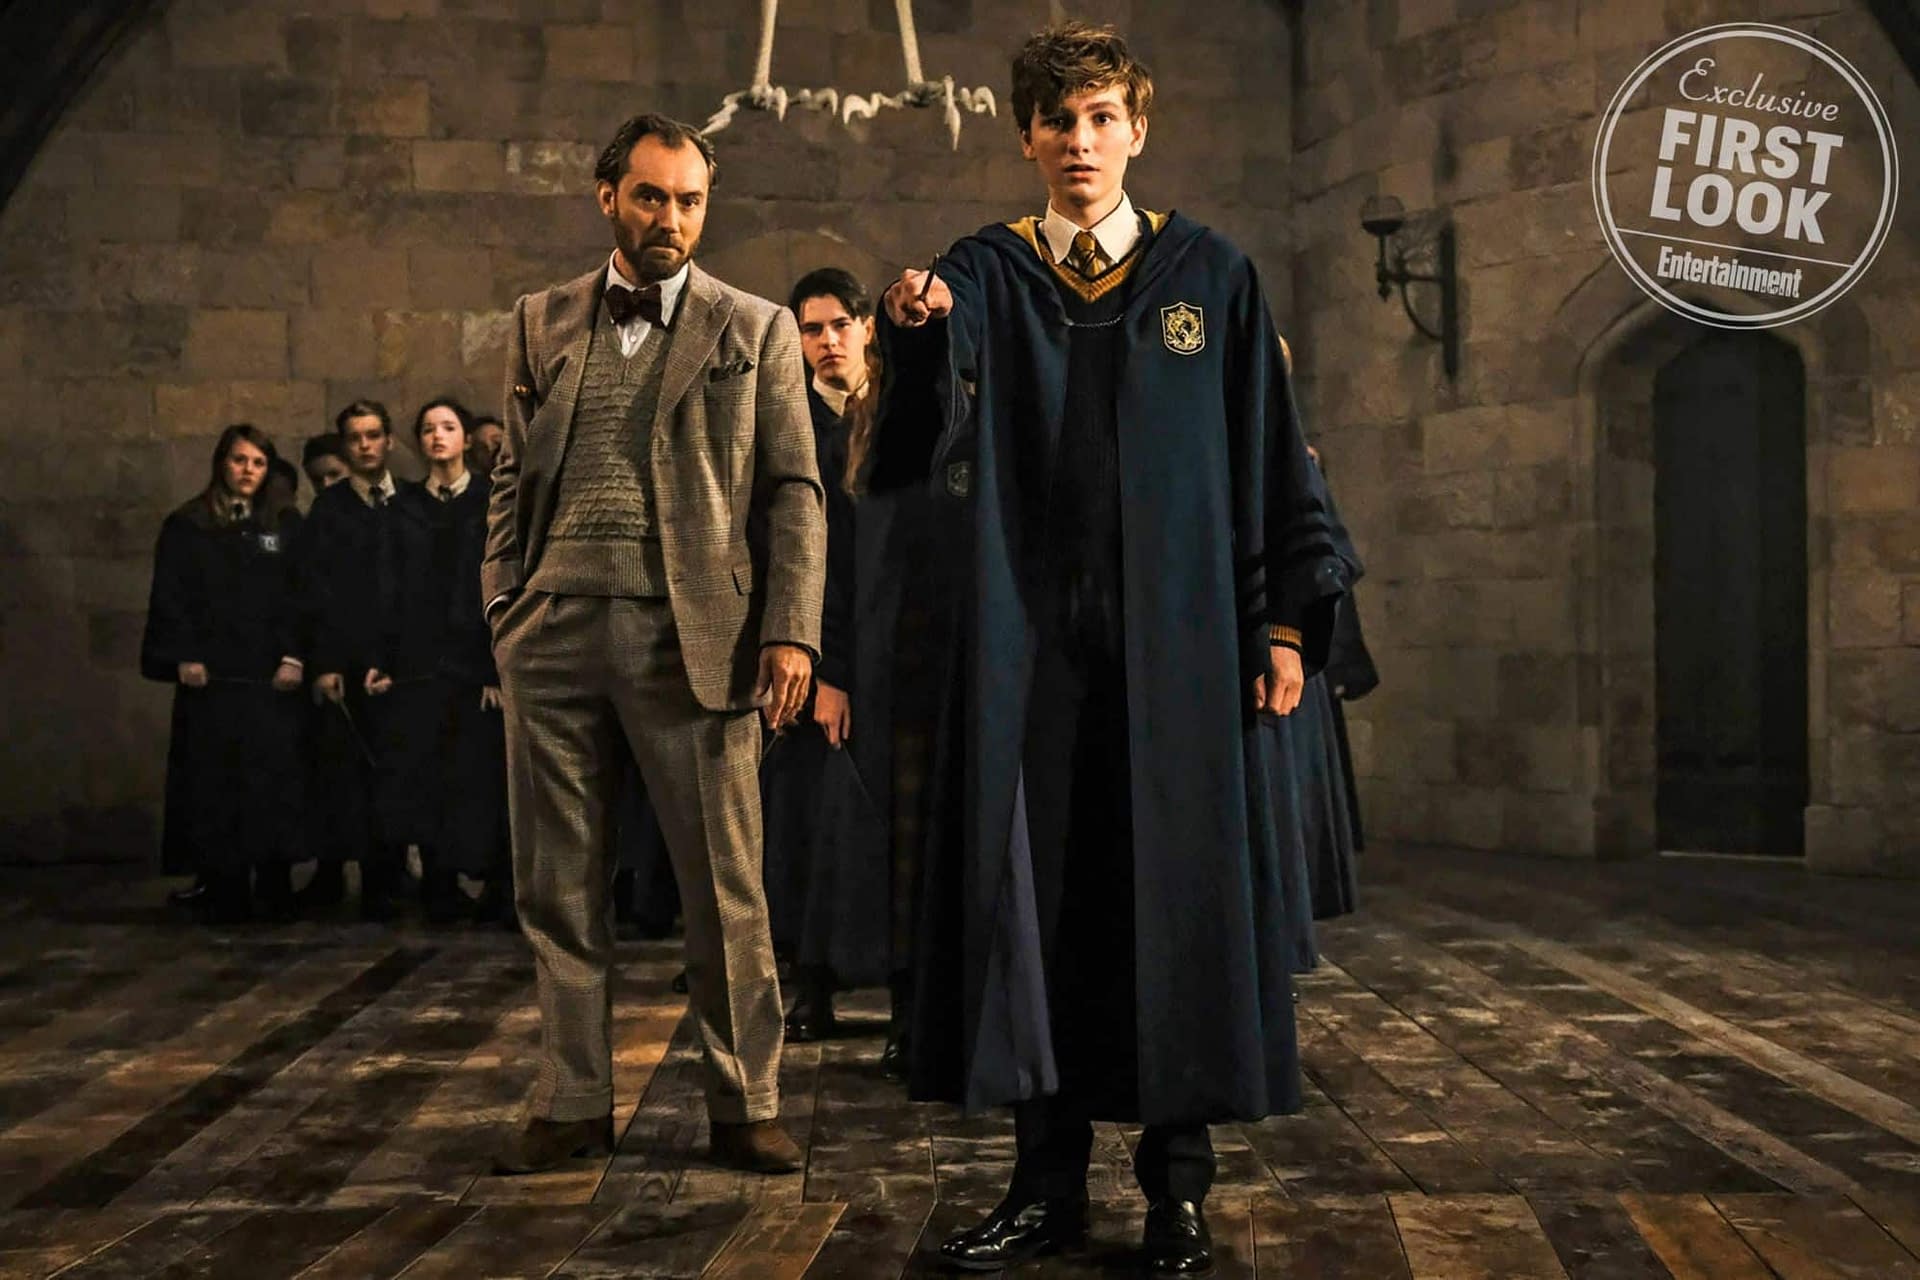 First Look at Young Newt in New Image from Fantastic Beasts: The Crimes of Grindelwald